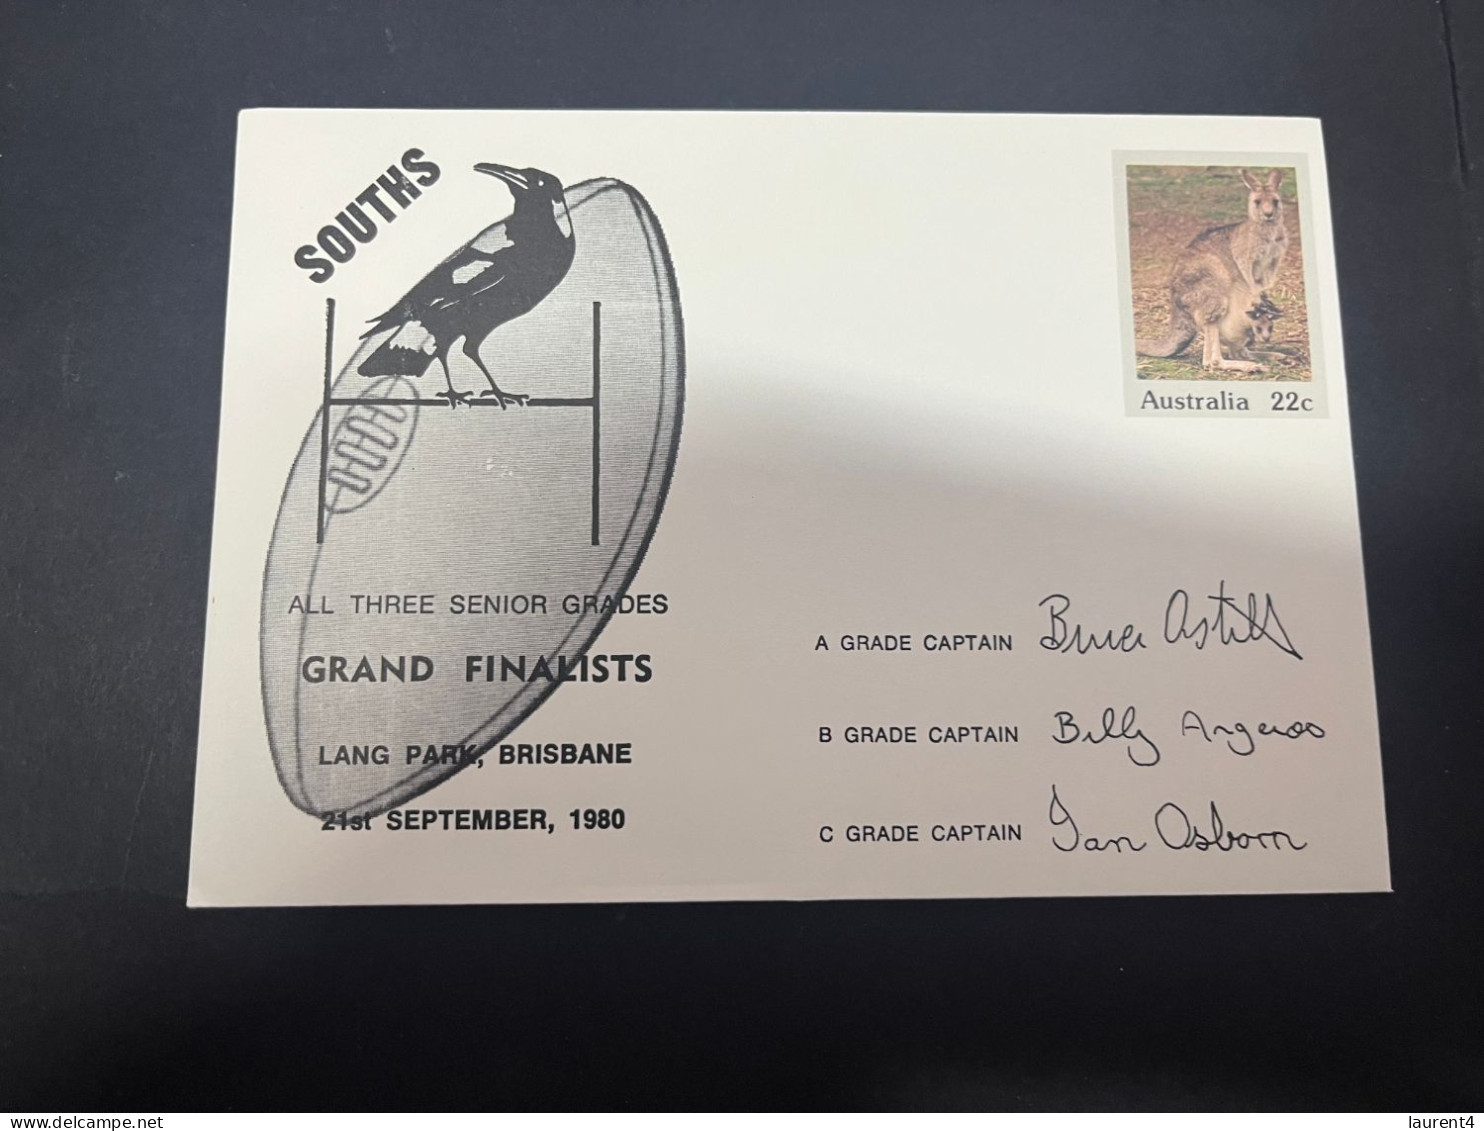 1-5-2023 (3 Z 39) Australia FDC (1 Covers) 1980 - OZ Football - South (magpies) Grand Finalists (signed - Kangaroo) - Premiers Jours (FDC)